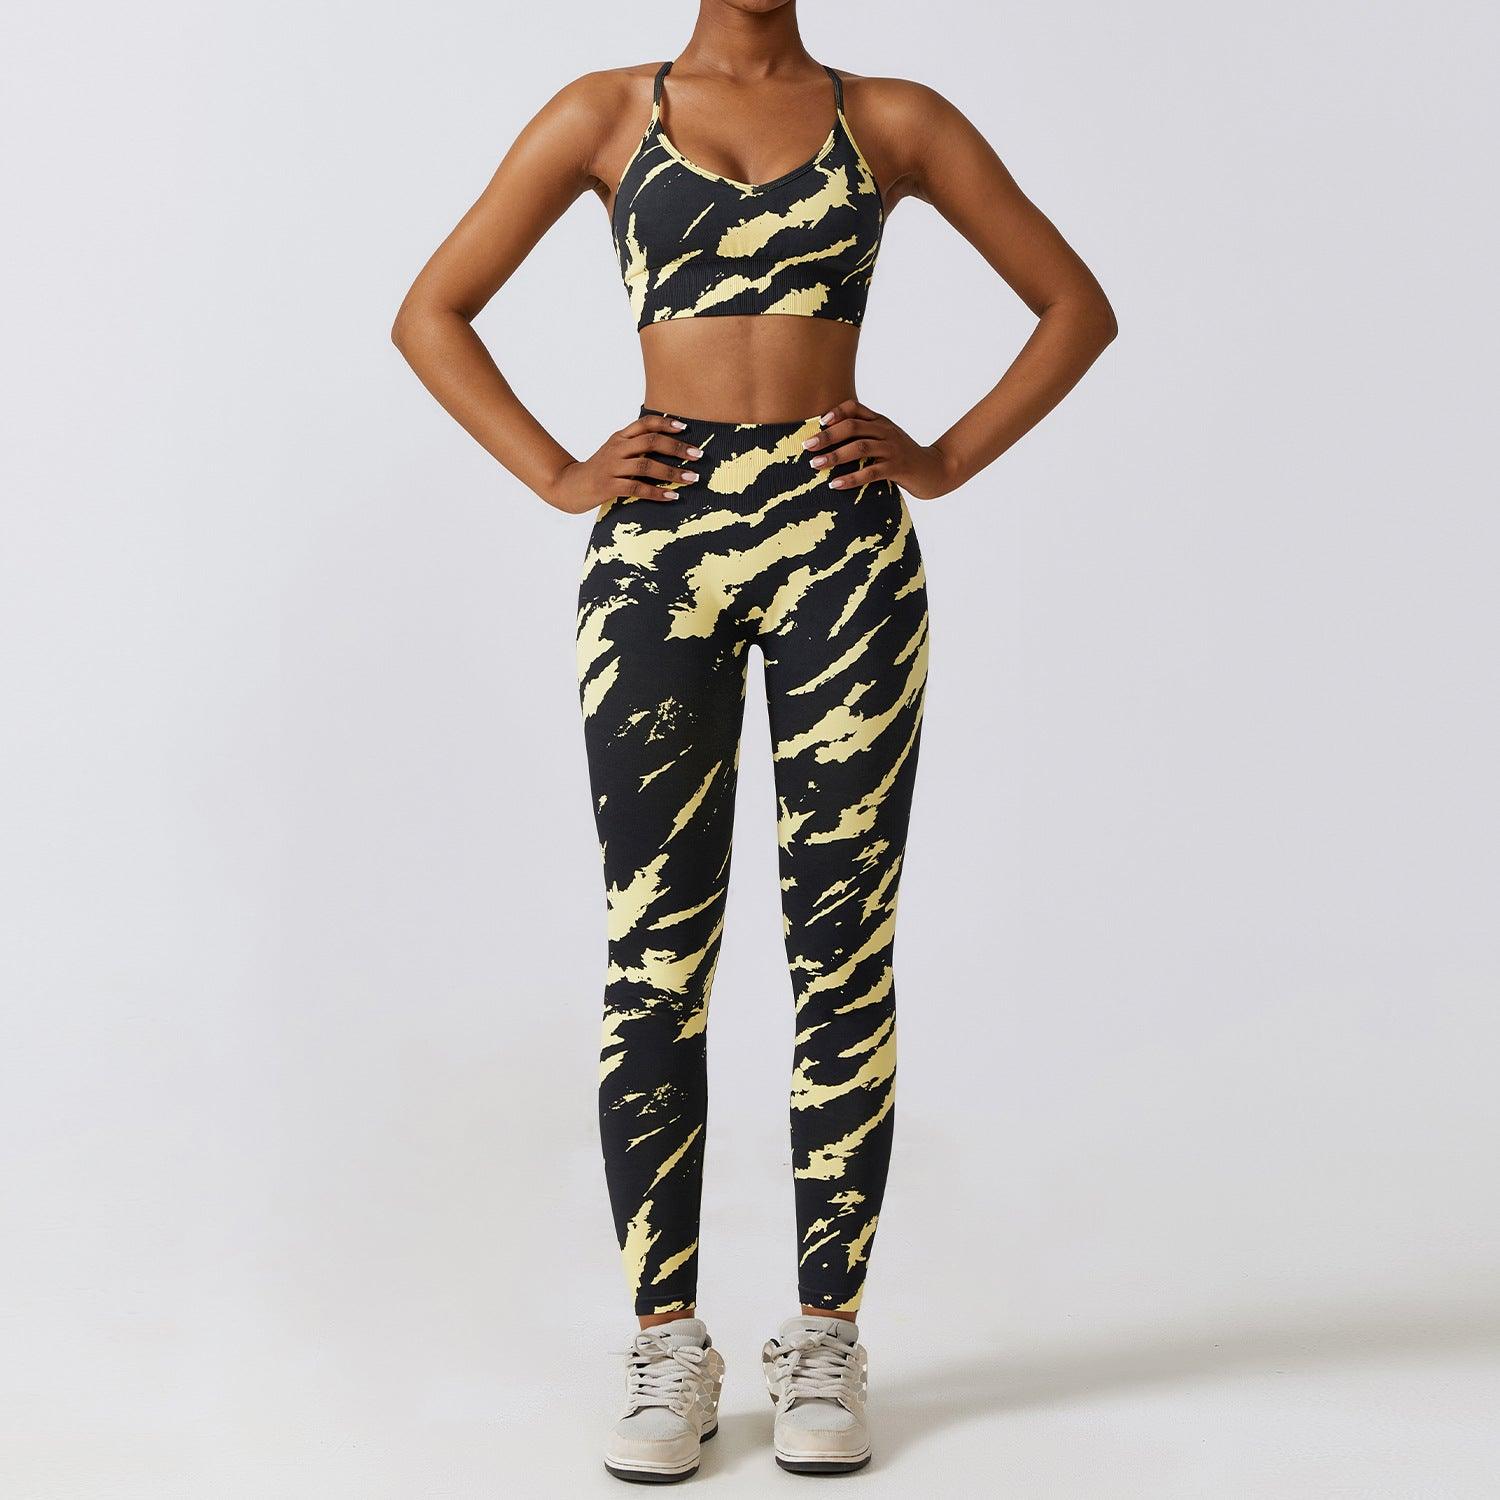 Camouflage Printing Seamless Yoga Suit Quick-drying High Waist Running Workout Clothes - AL MONI EXPRESS